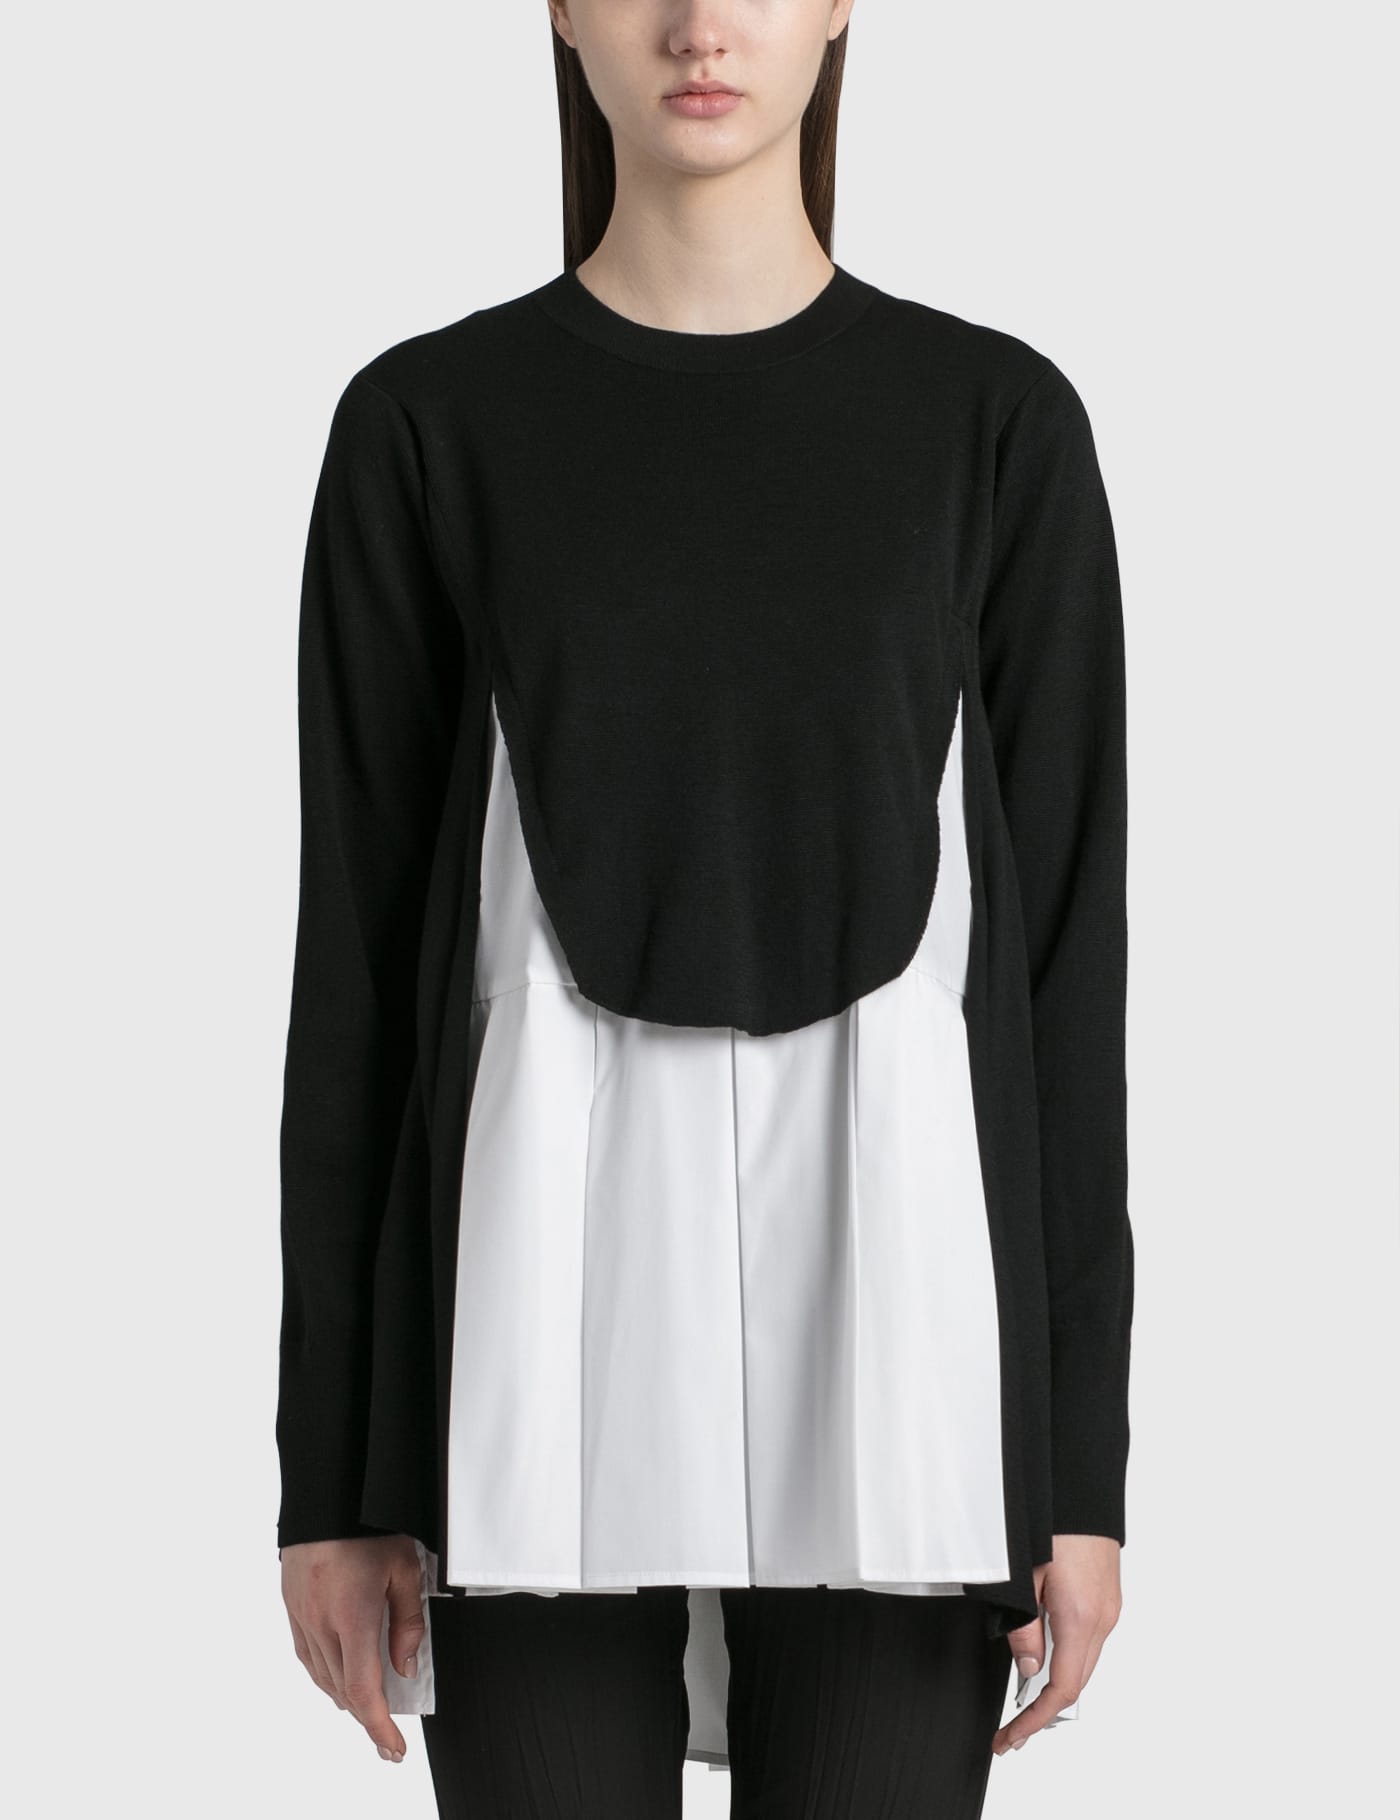 Enföld - Knit Layered Pleated Top | HBX - Globally Curated Fashion